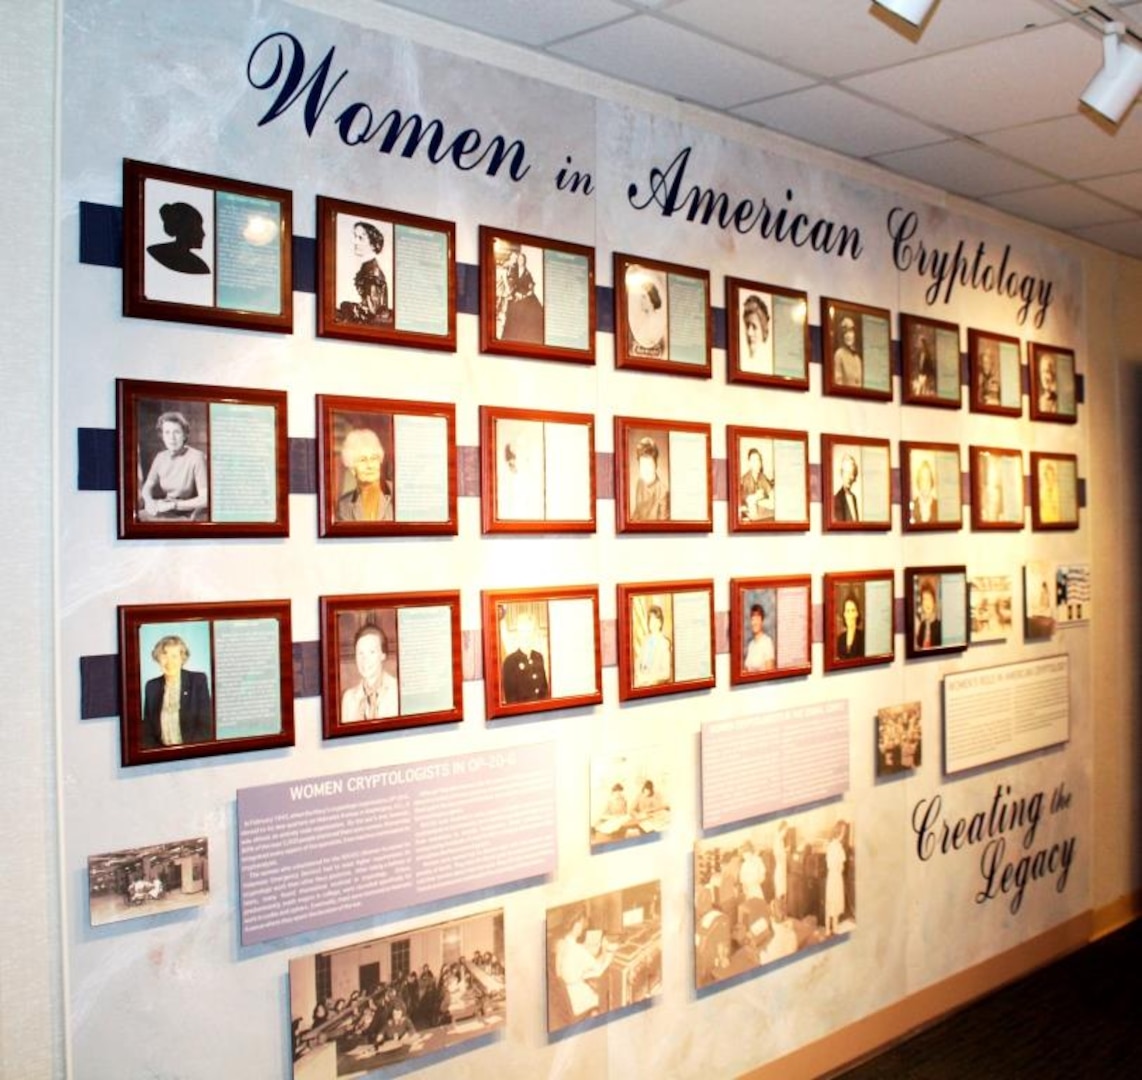 Women in American Cryptology Wall at the National Cryptologic Museum.